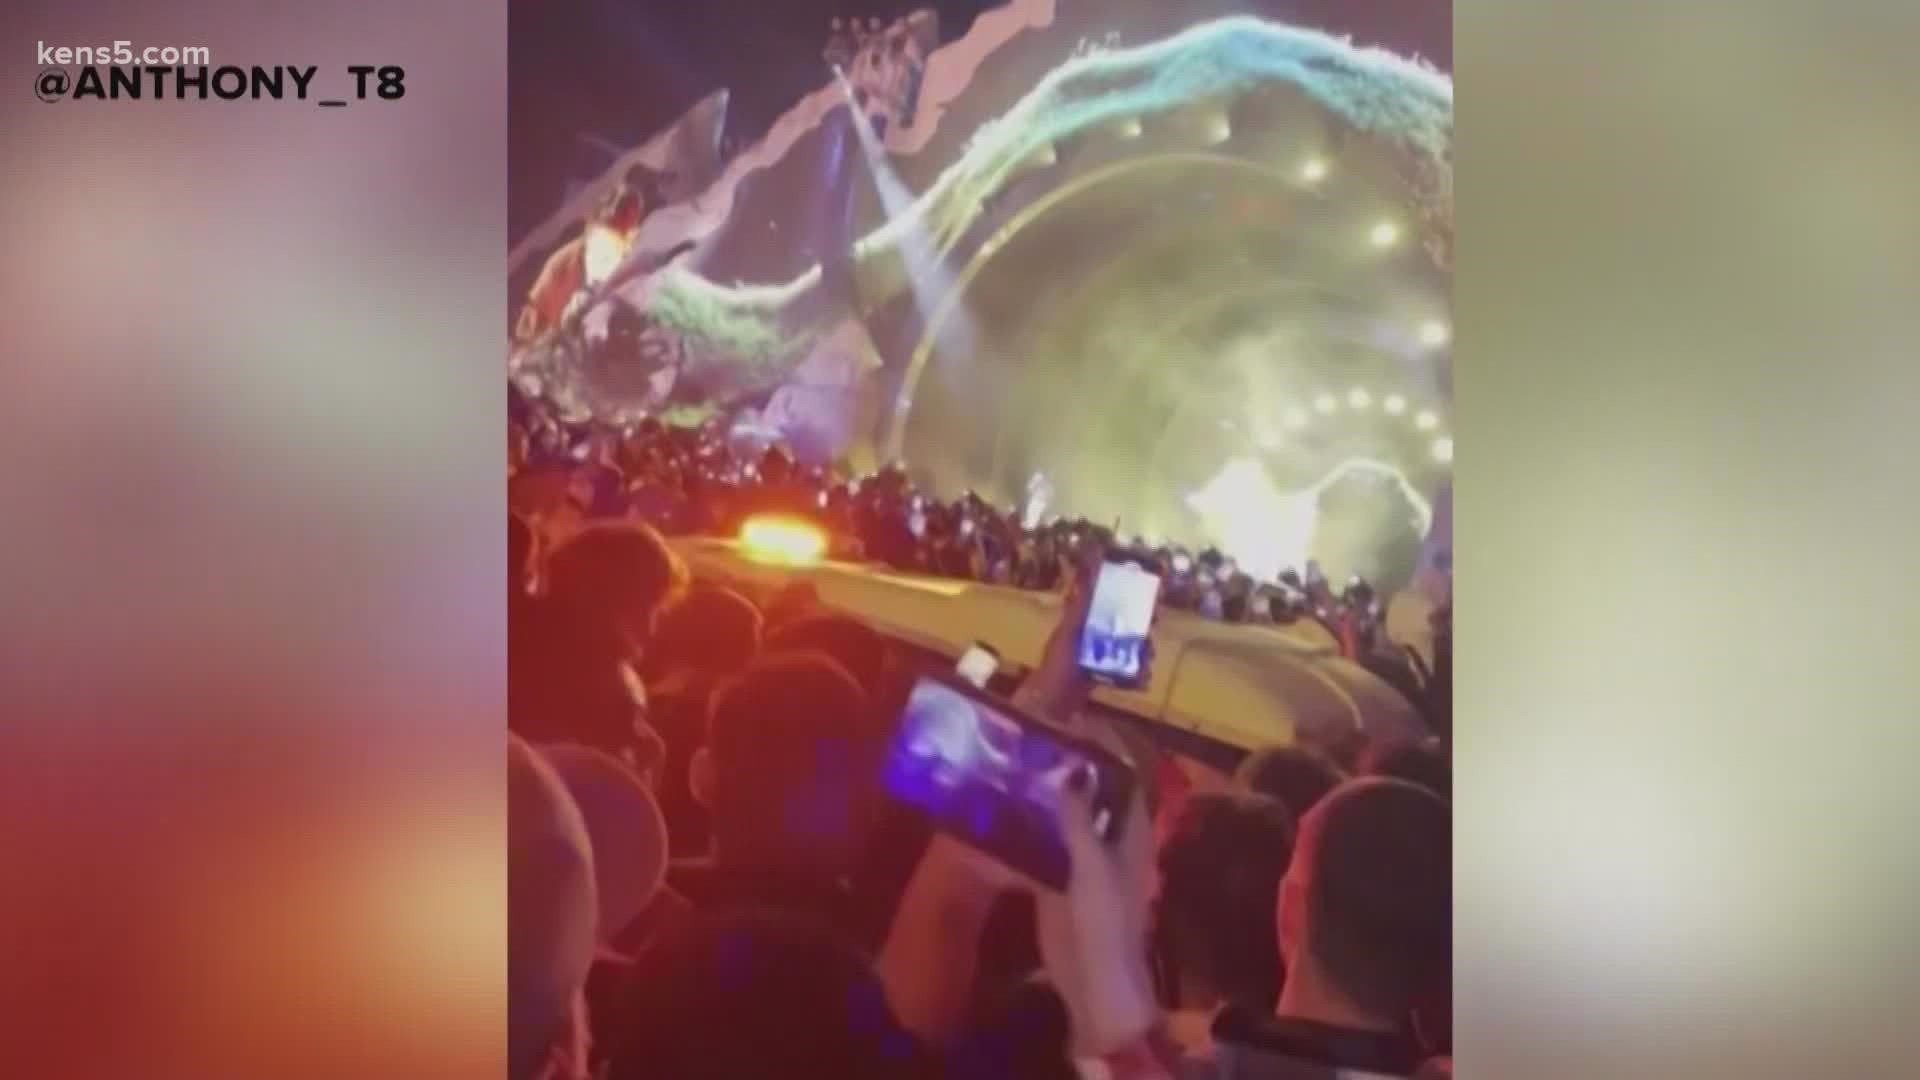 The Astroworld concert left 10 people dead and several others injured. In Concert Crush some concertgoers share their firsthand accounts of what happened.